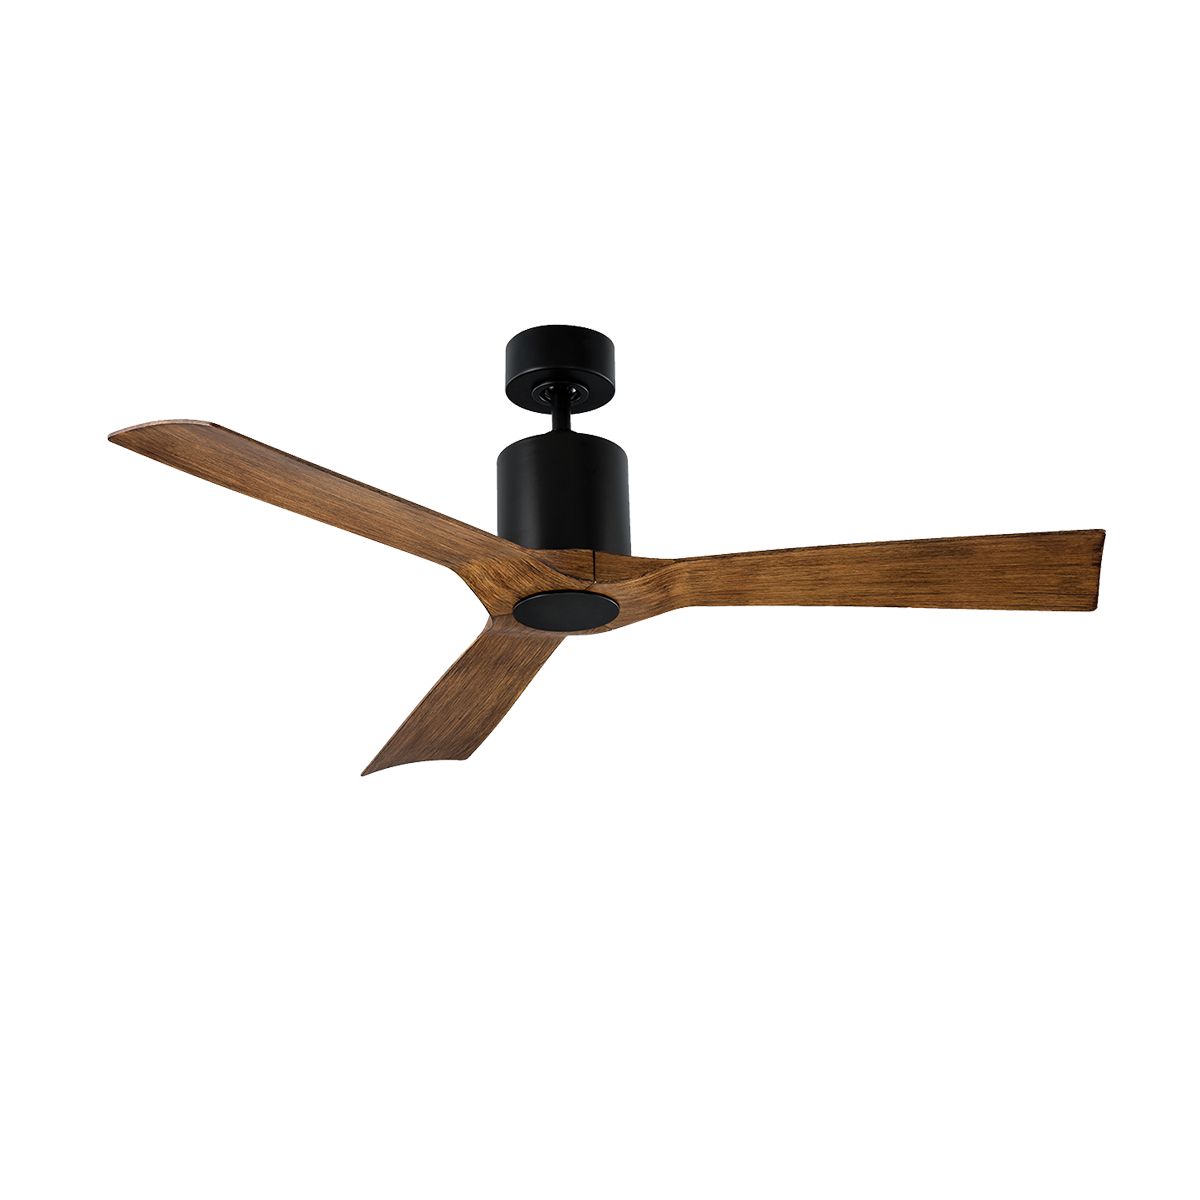 Aviator 54 Inch Propeller Outdoor Smart Ceiling Fan With Wall Control